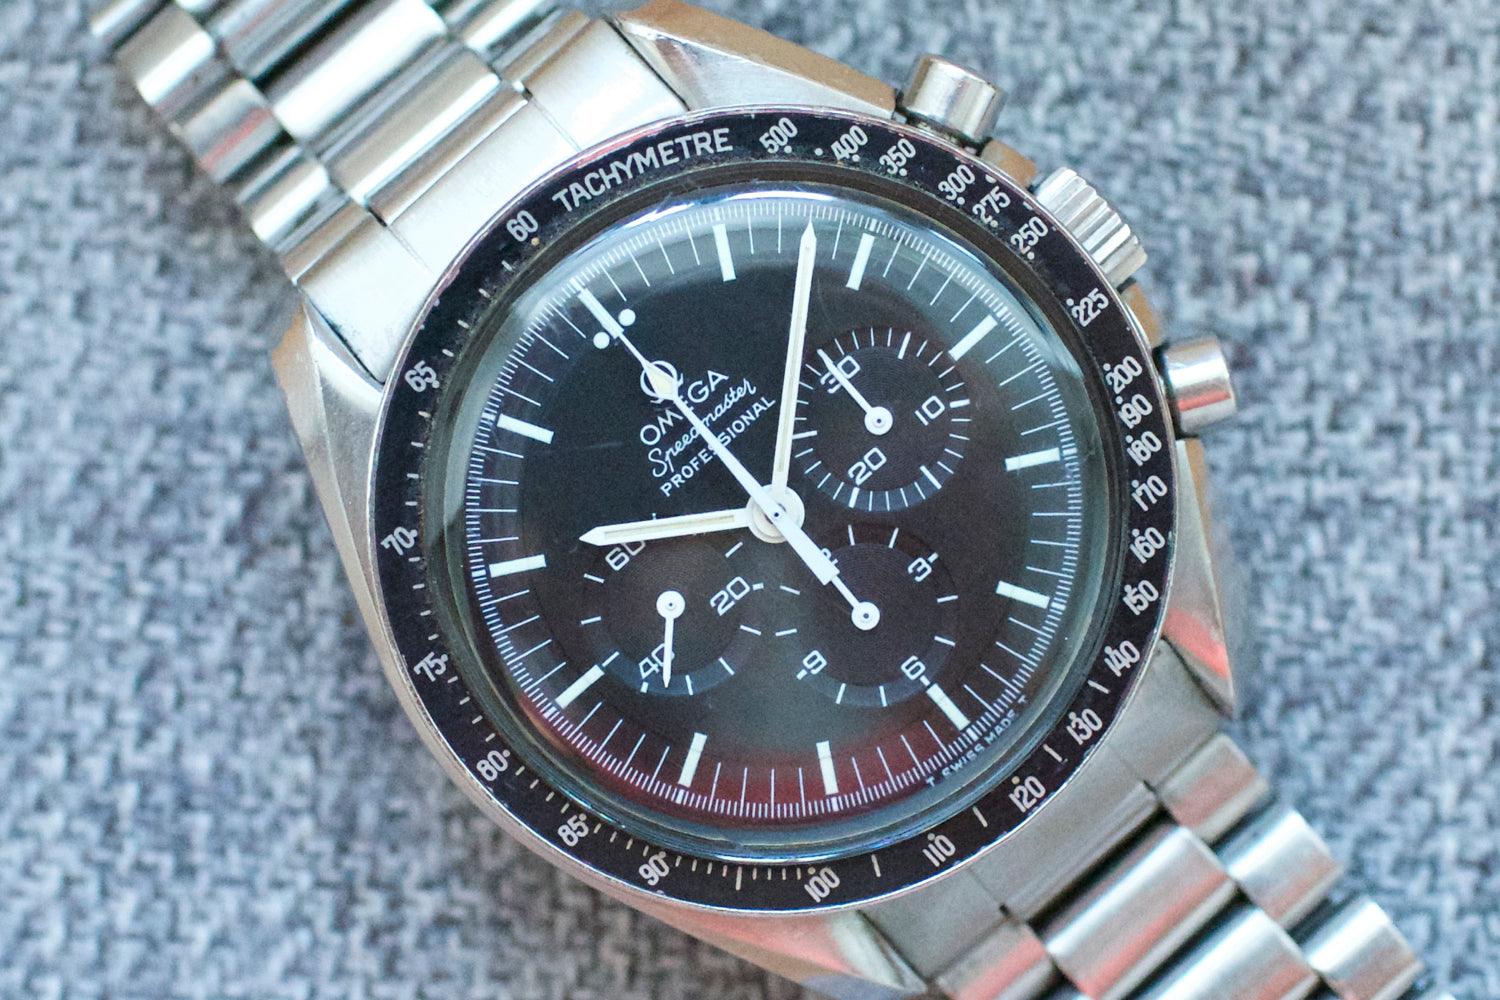 SOLDOUT: Omega Speedmaster Professional Moonwatch 145.022 - WearingTime Luxury Watches